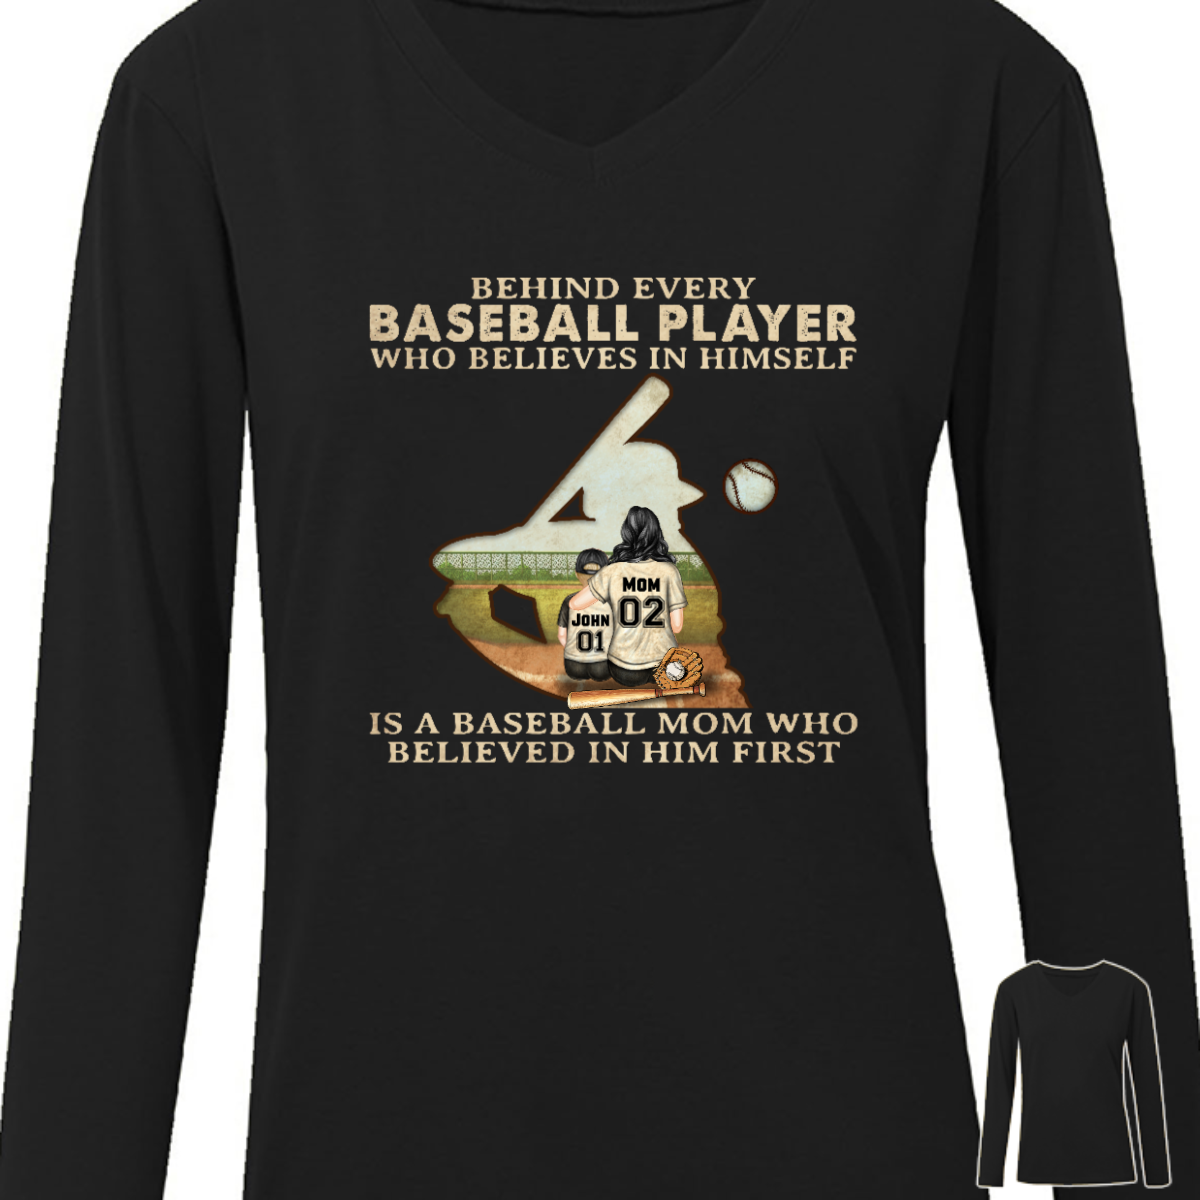 Baseball Mom Behind Every Baseball Player Who Believes In Himself - Mother Gift - Personalized Custom Long Sleeve Shirt